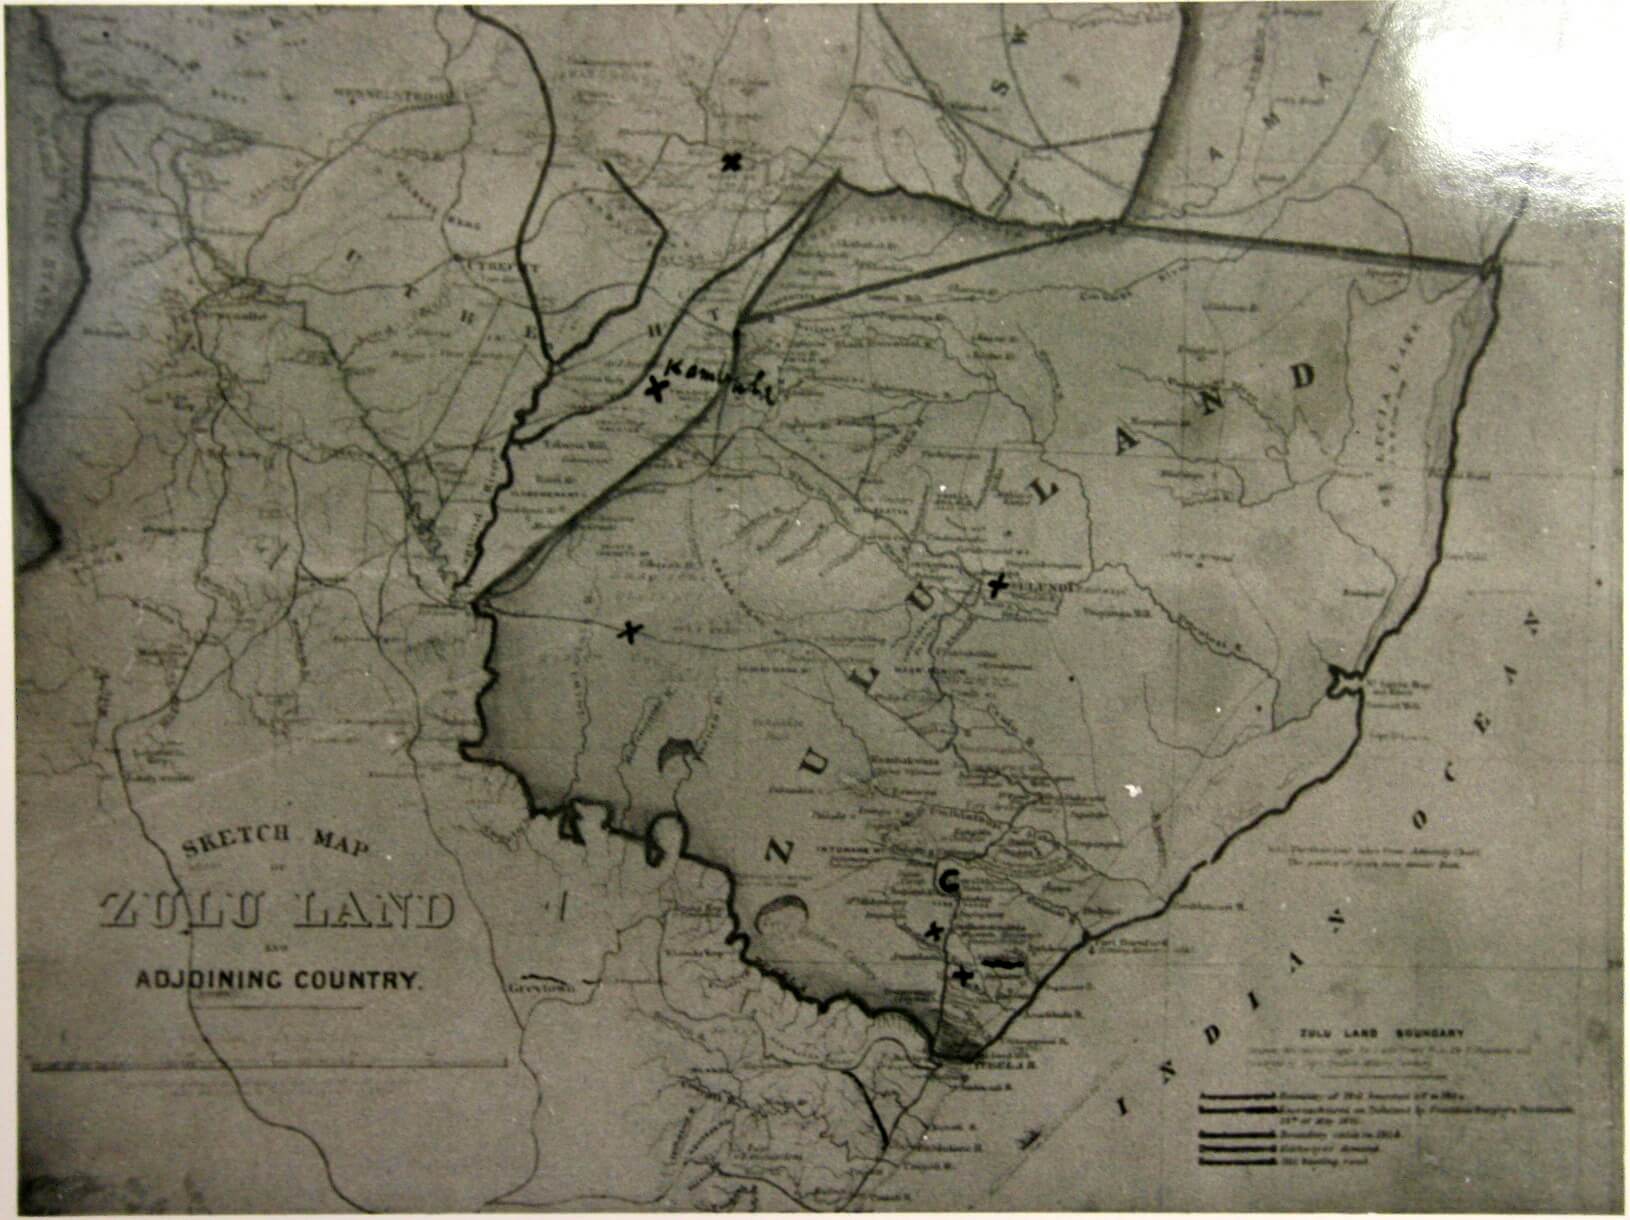 Zulu war map in the Newmarch Collection of the Killie Campbell Museum, Durban